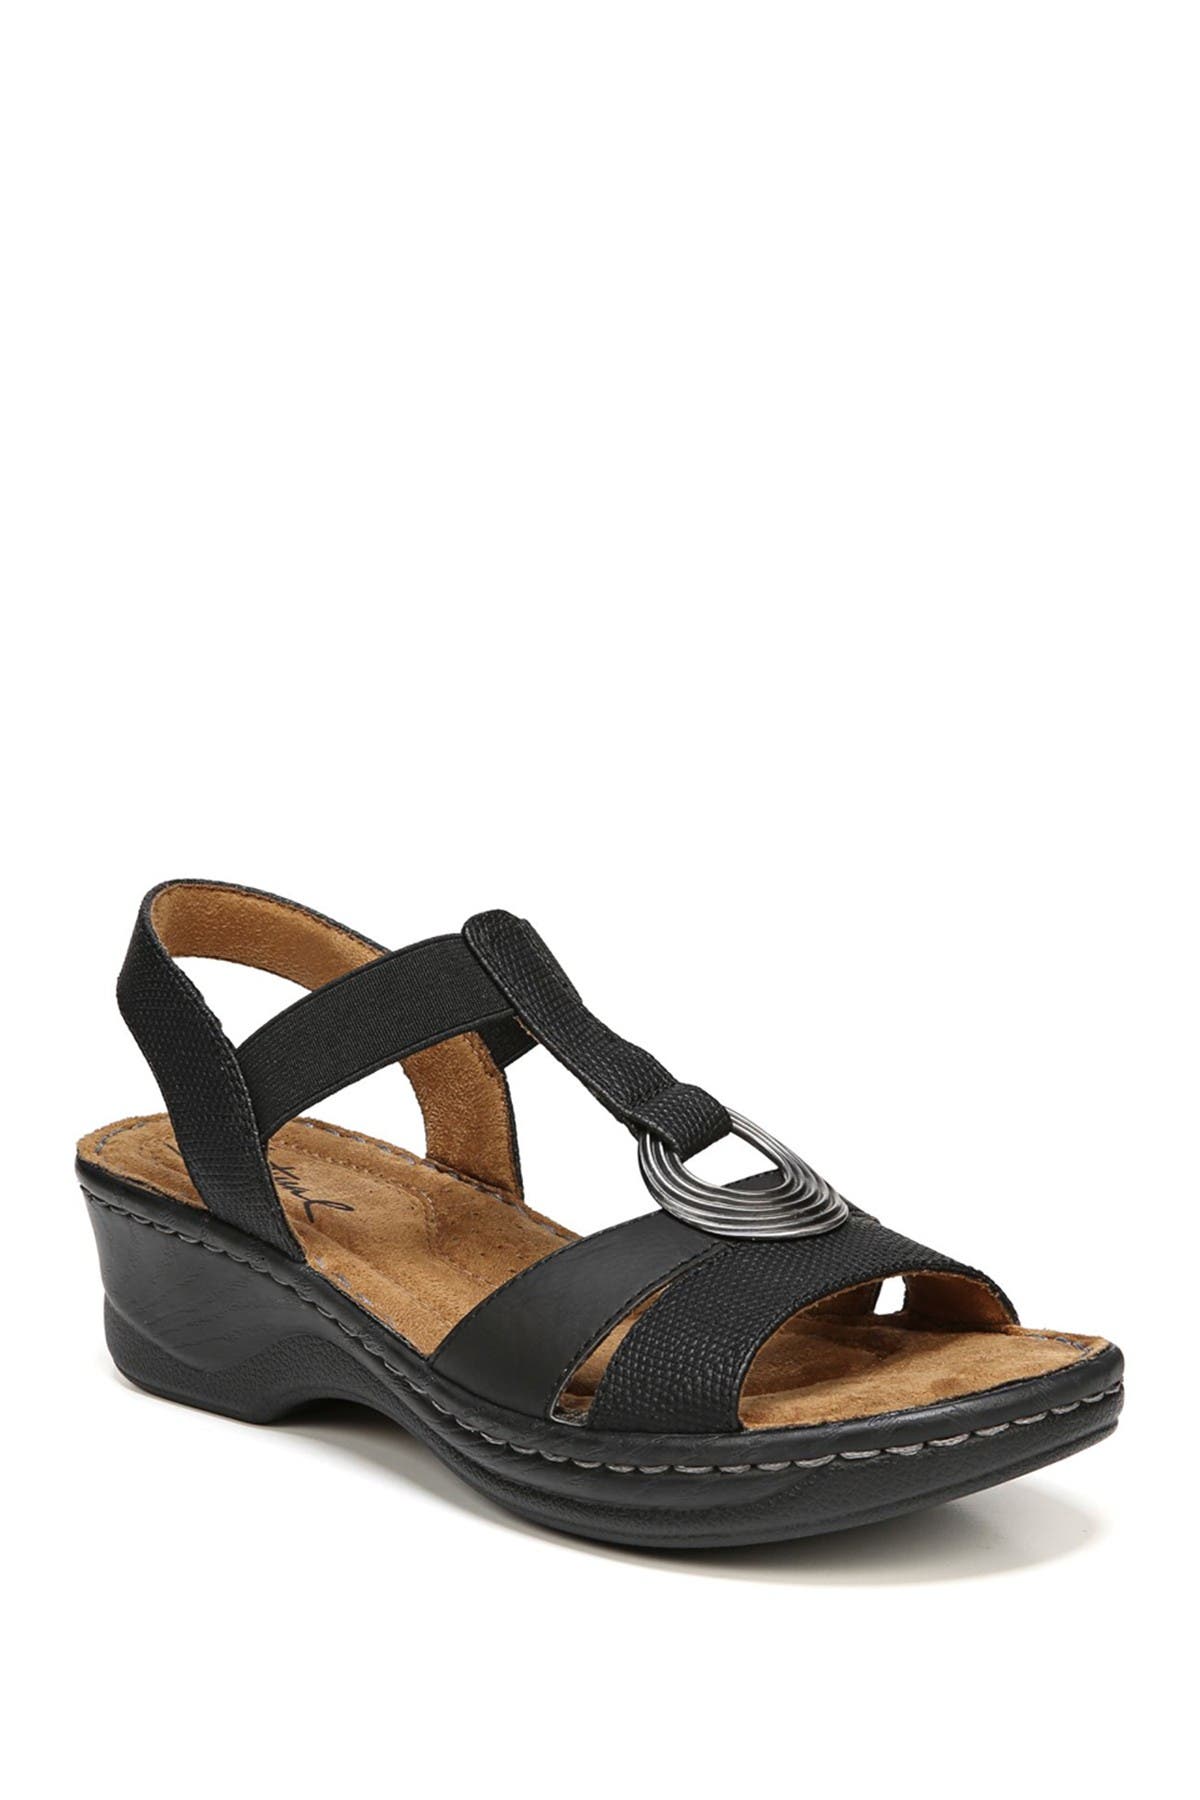 naturalizer t strap